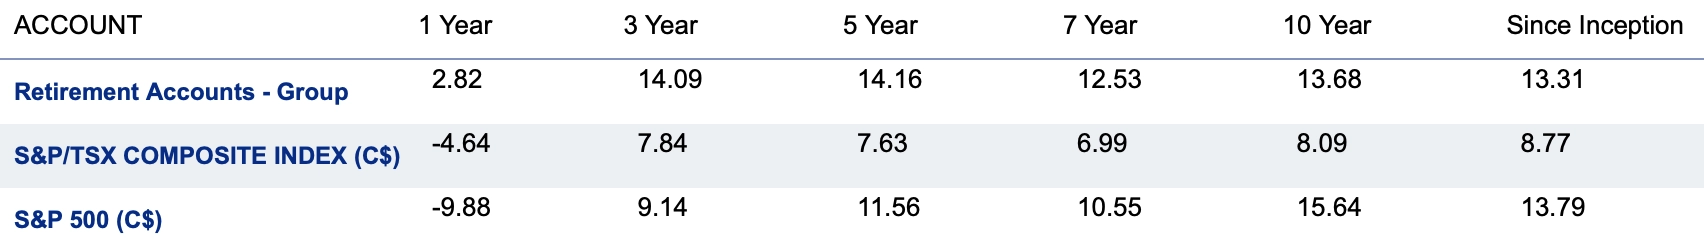 RBC Direct Investing - Annual Rate of Return Performance